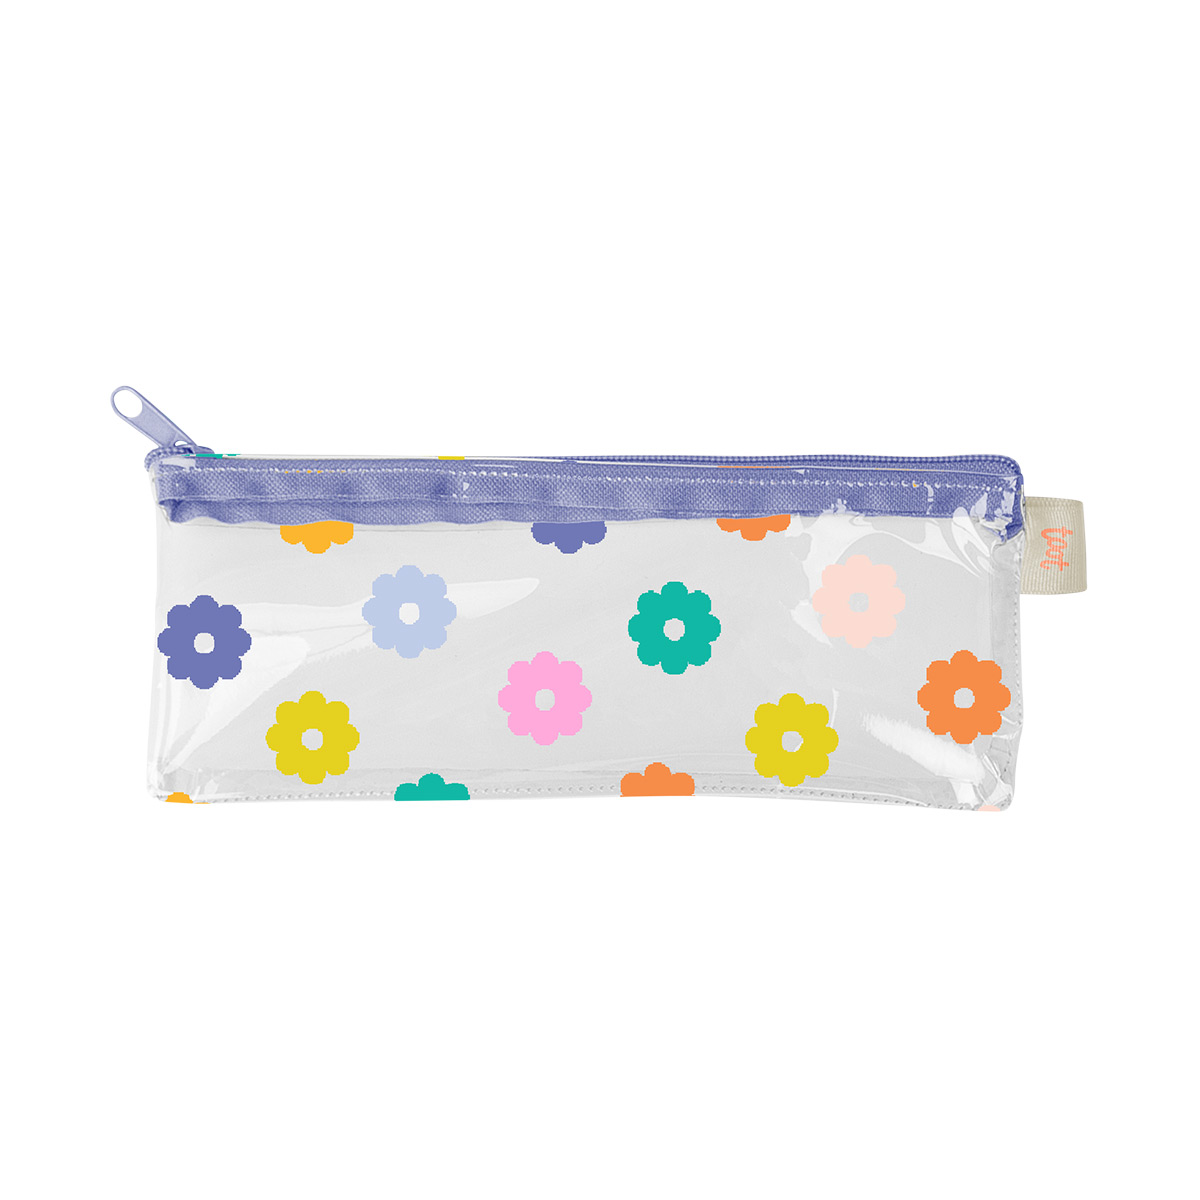 Vinyl Pencil Pouch | The Container Store